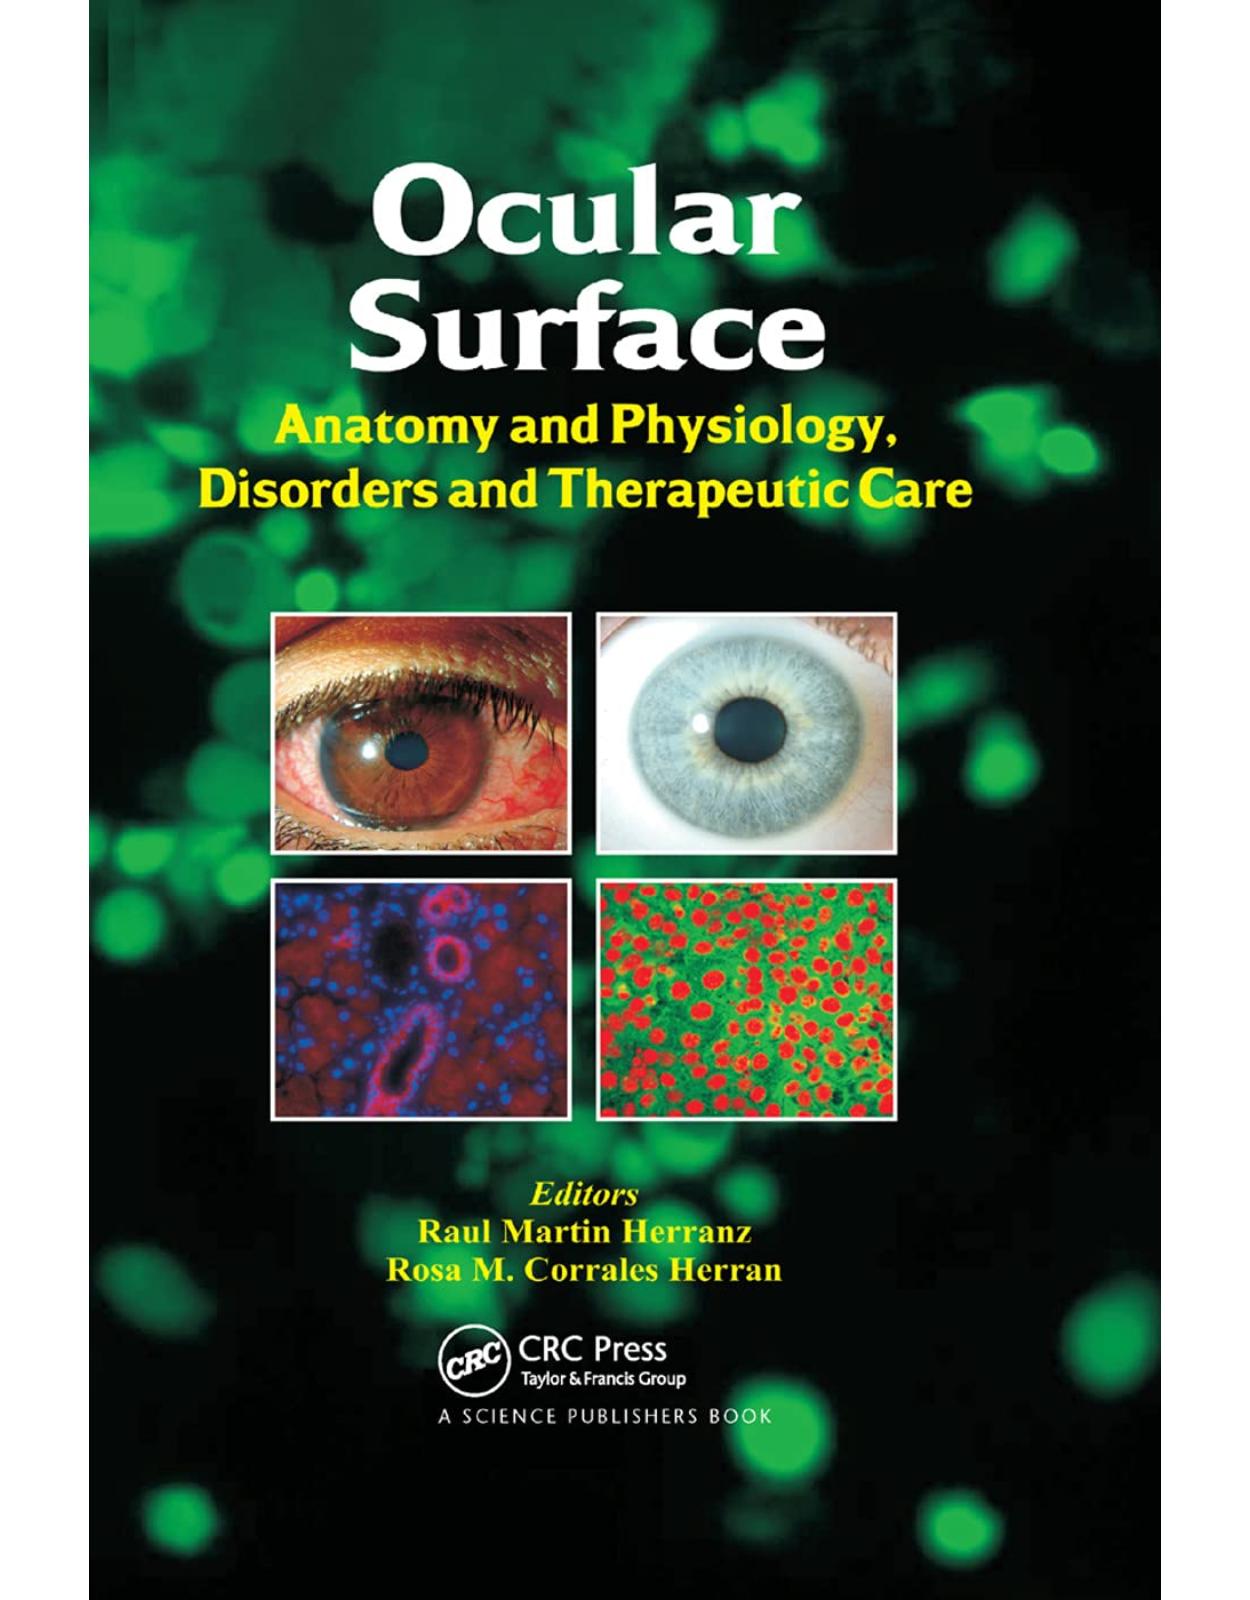 Ocular Surface: Anatomy and Physiology, Disorders and Therapeutic Care